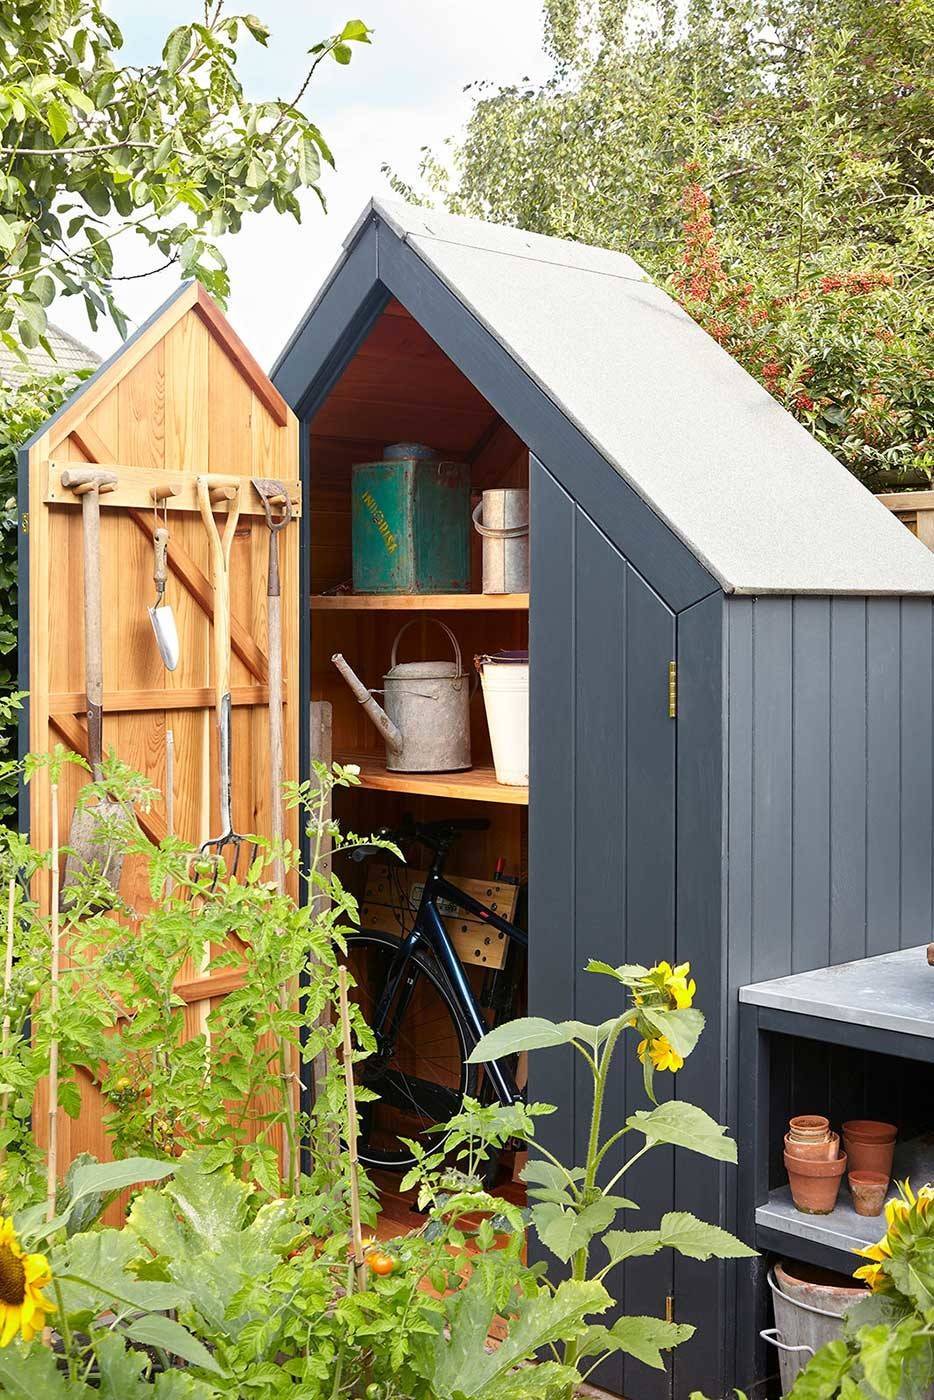 Nicely organized small shed (from Houzz)